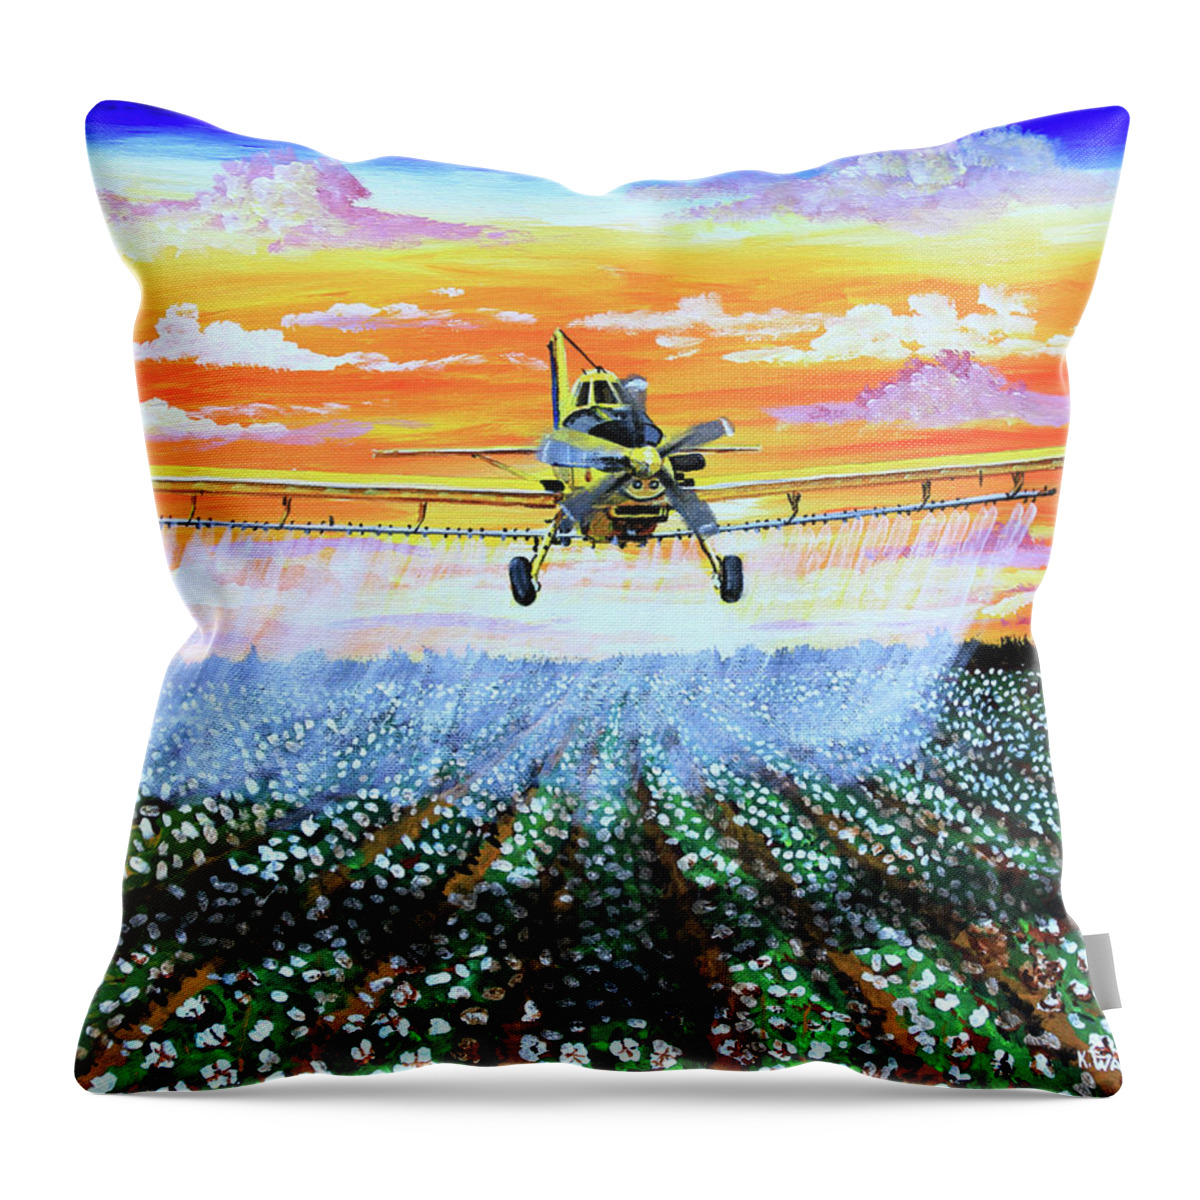 Air Tractor Throw Pillow featuring the painting Air Tractor at Sunset Over Cotton by Karl Wagner